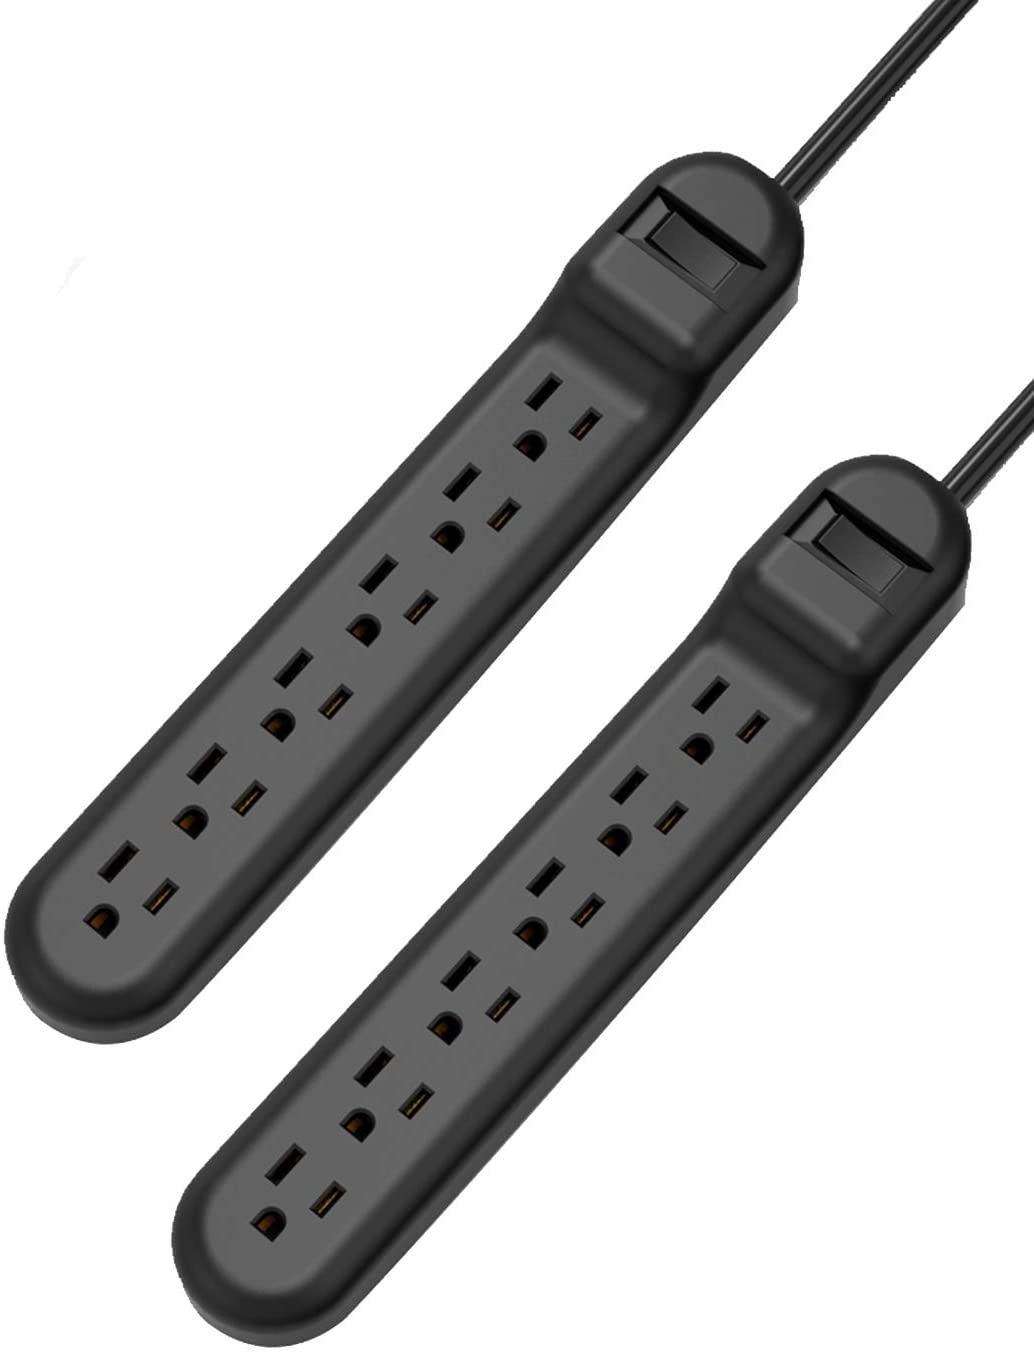 Pack of 2 Black Surge Protector with 6 Outlets, 2.5-Foot Flat Plug Extension Cord Power Strip, 500 Joule, Multiple Protection Outlet Strip for Home, Office, Travel, School